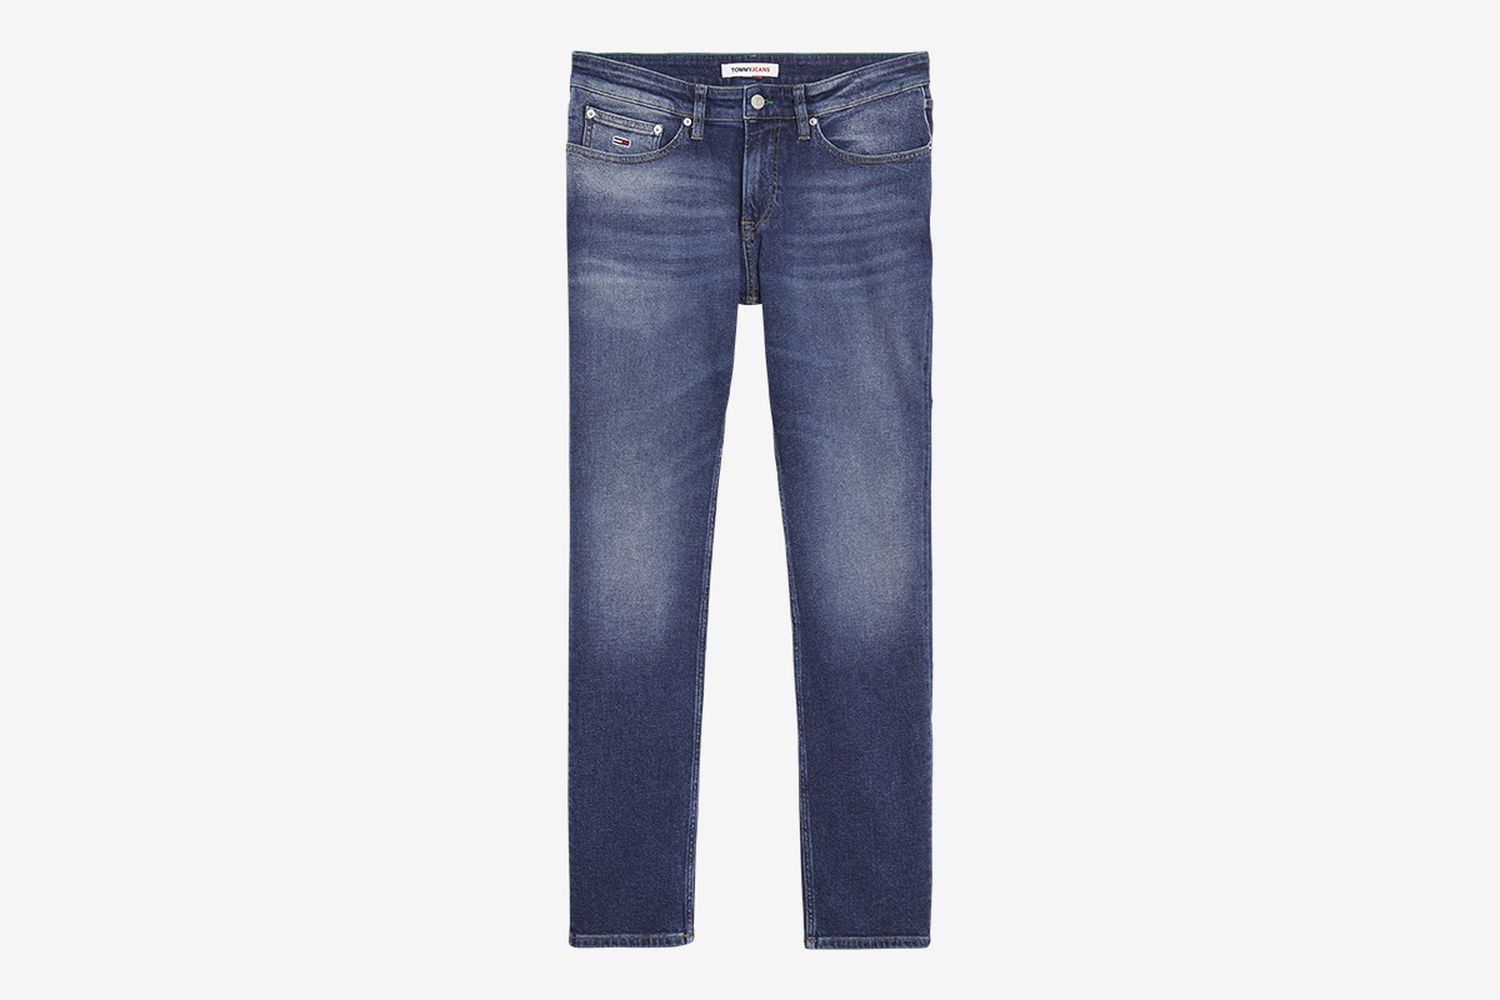 Slim Fit Washed and Worn Jean